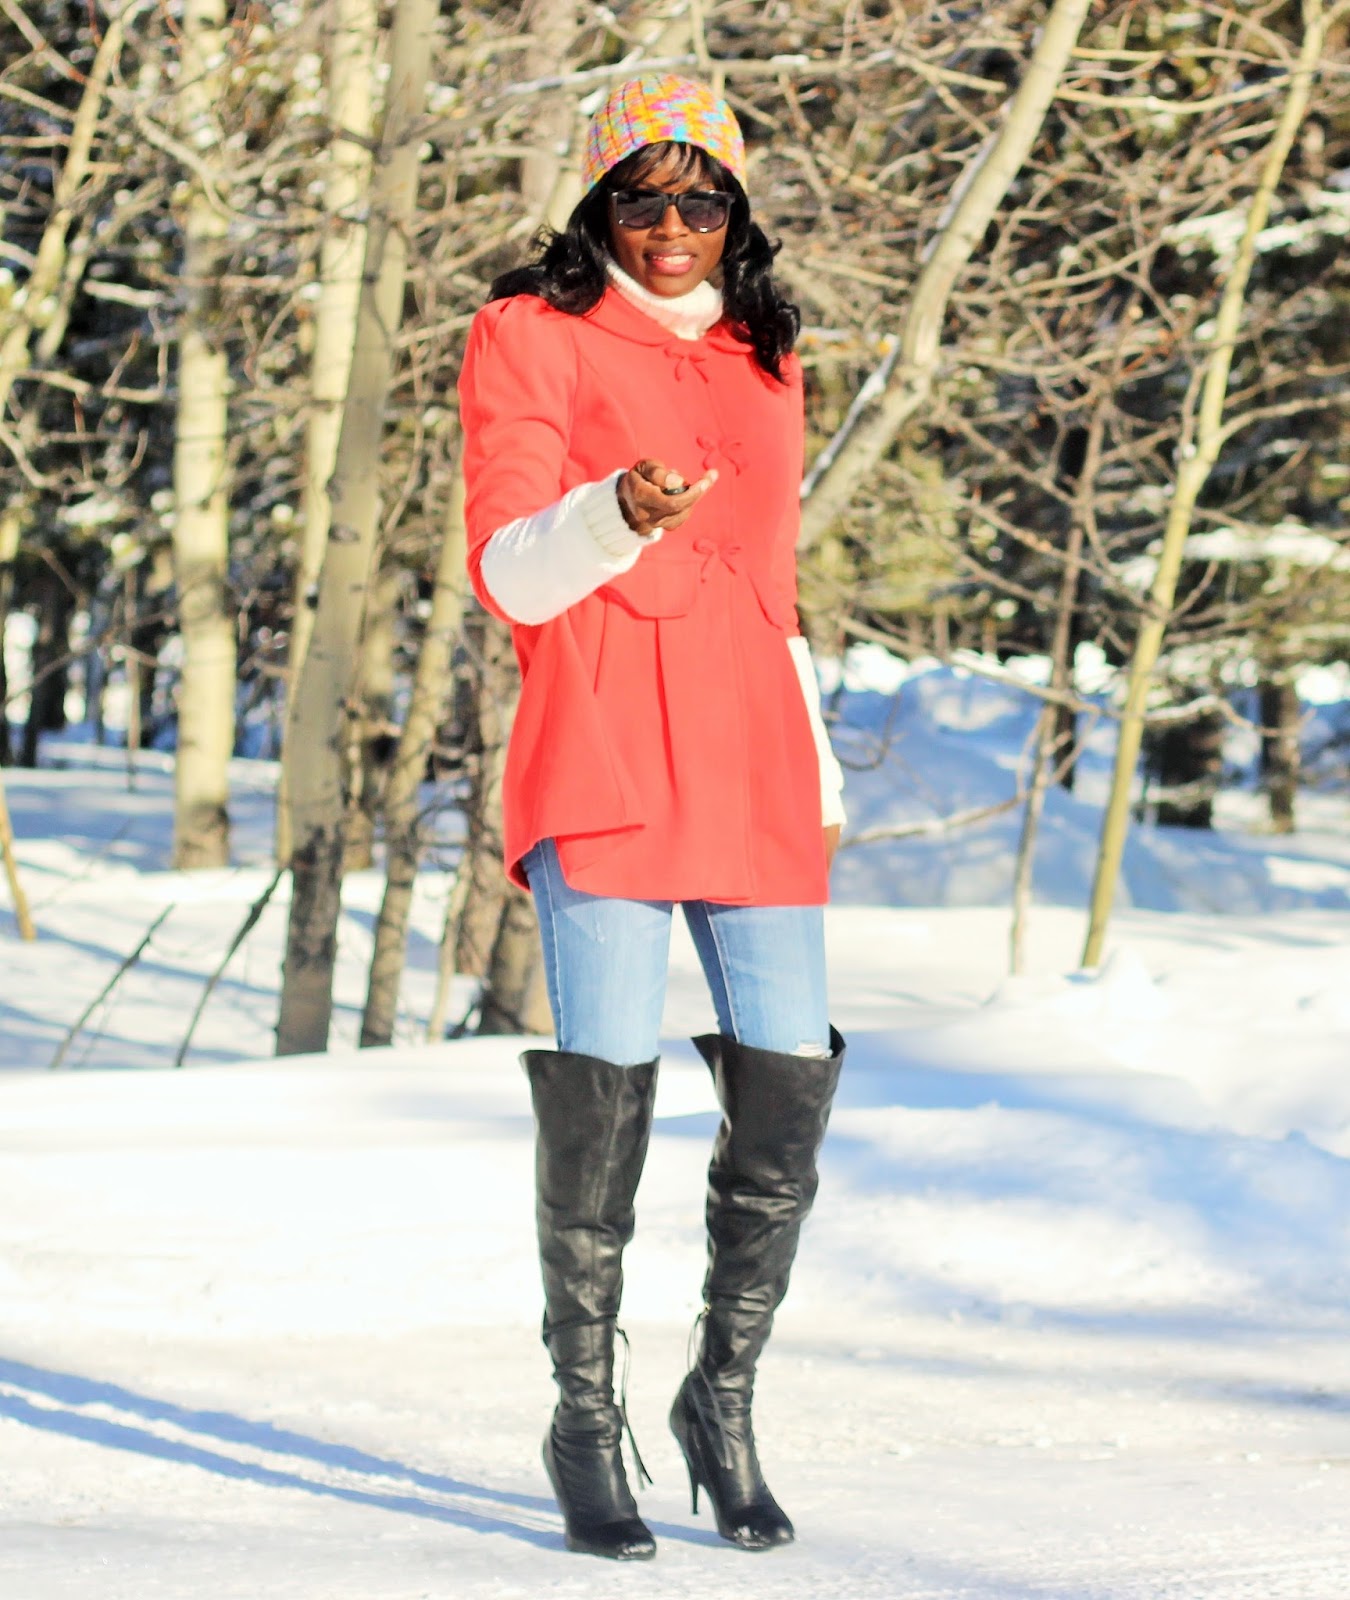 Coat dress styled with over the knee boots